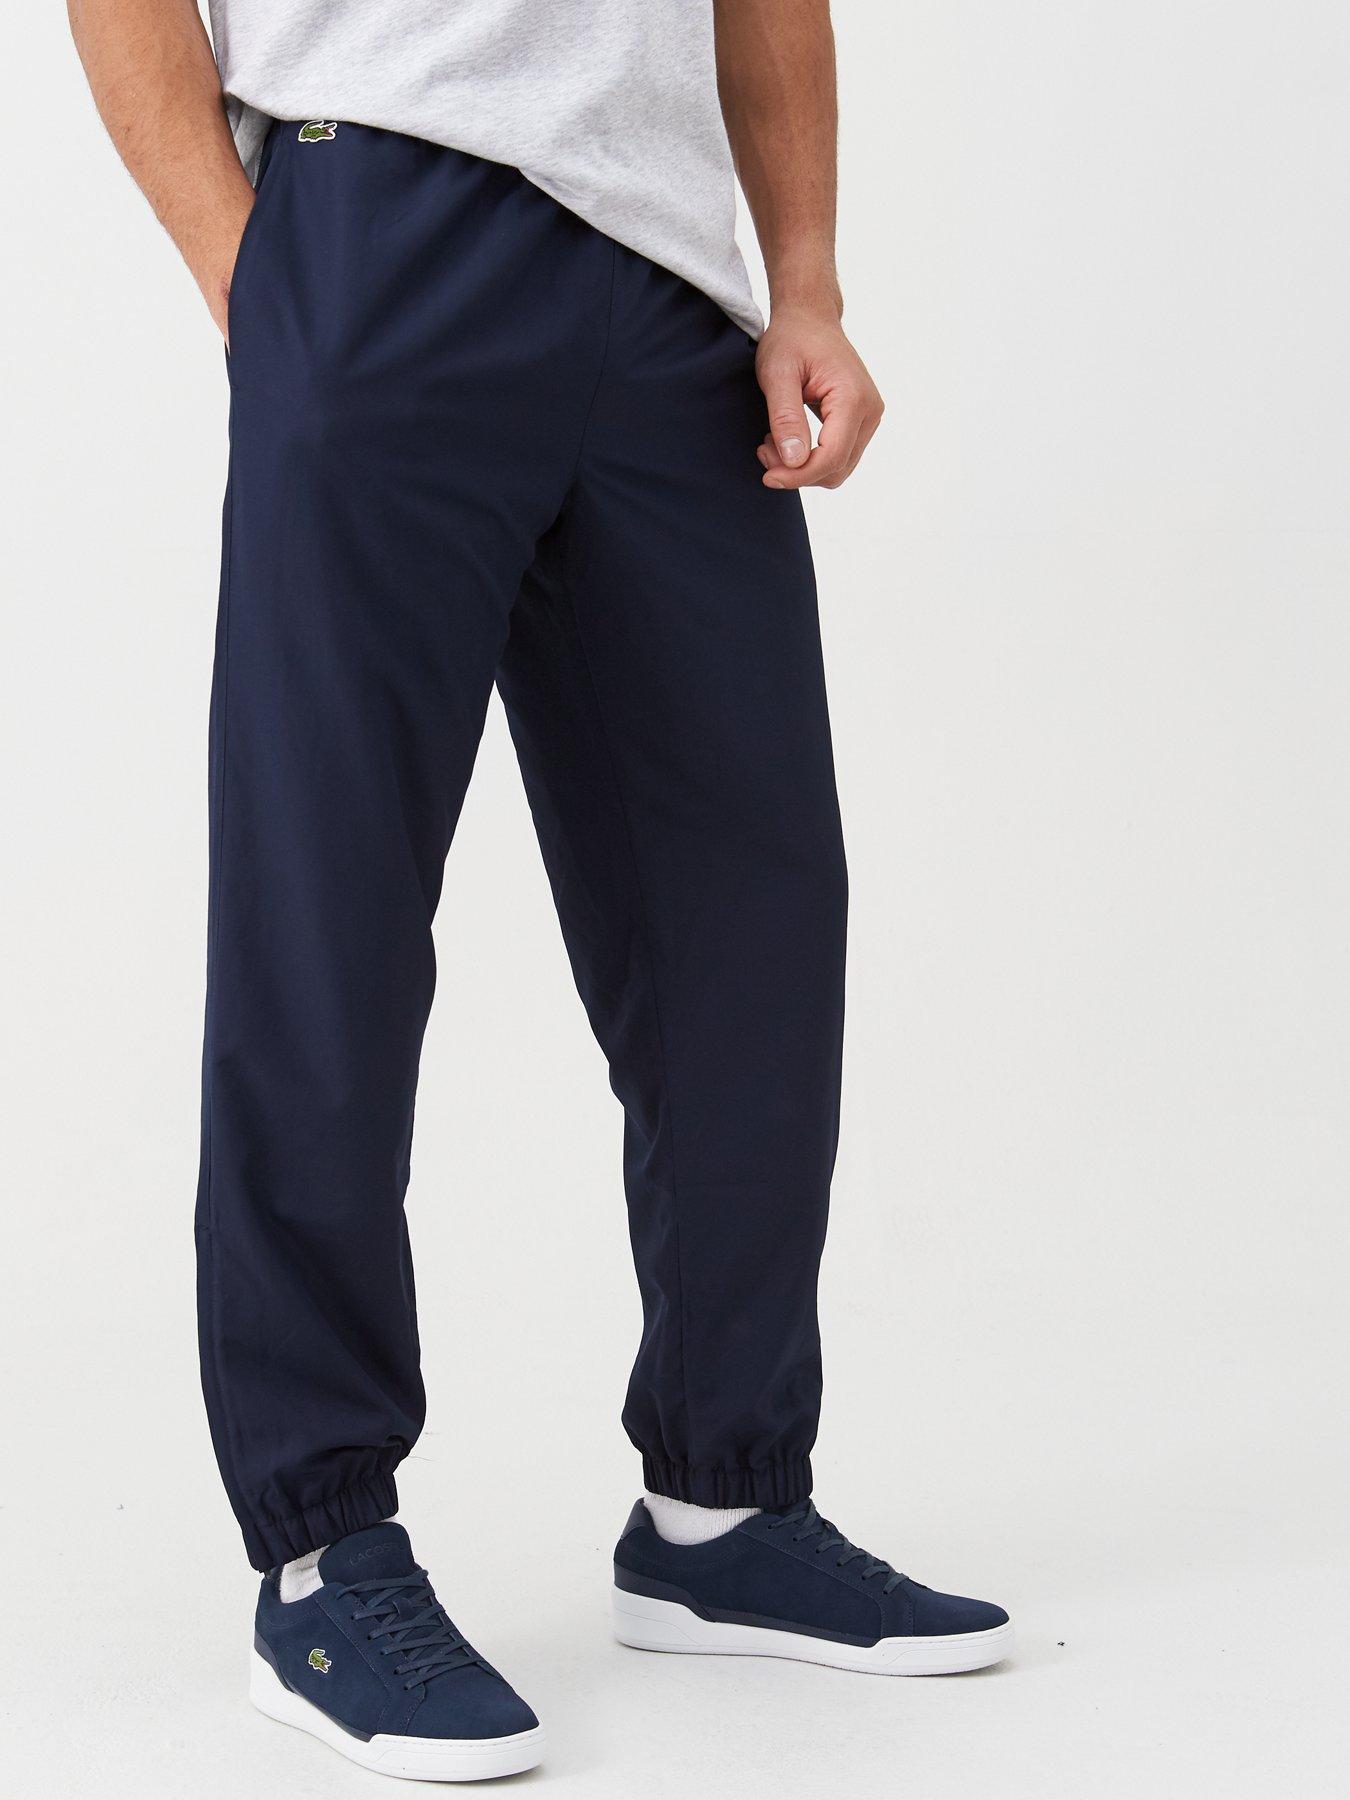 lacoste track pant